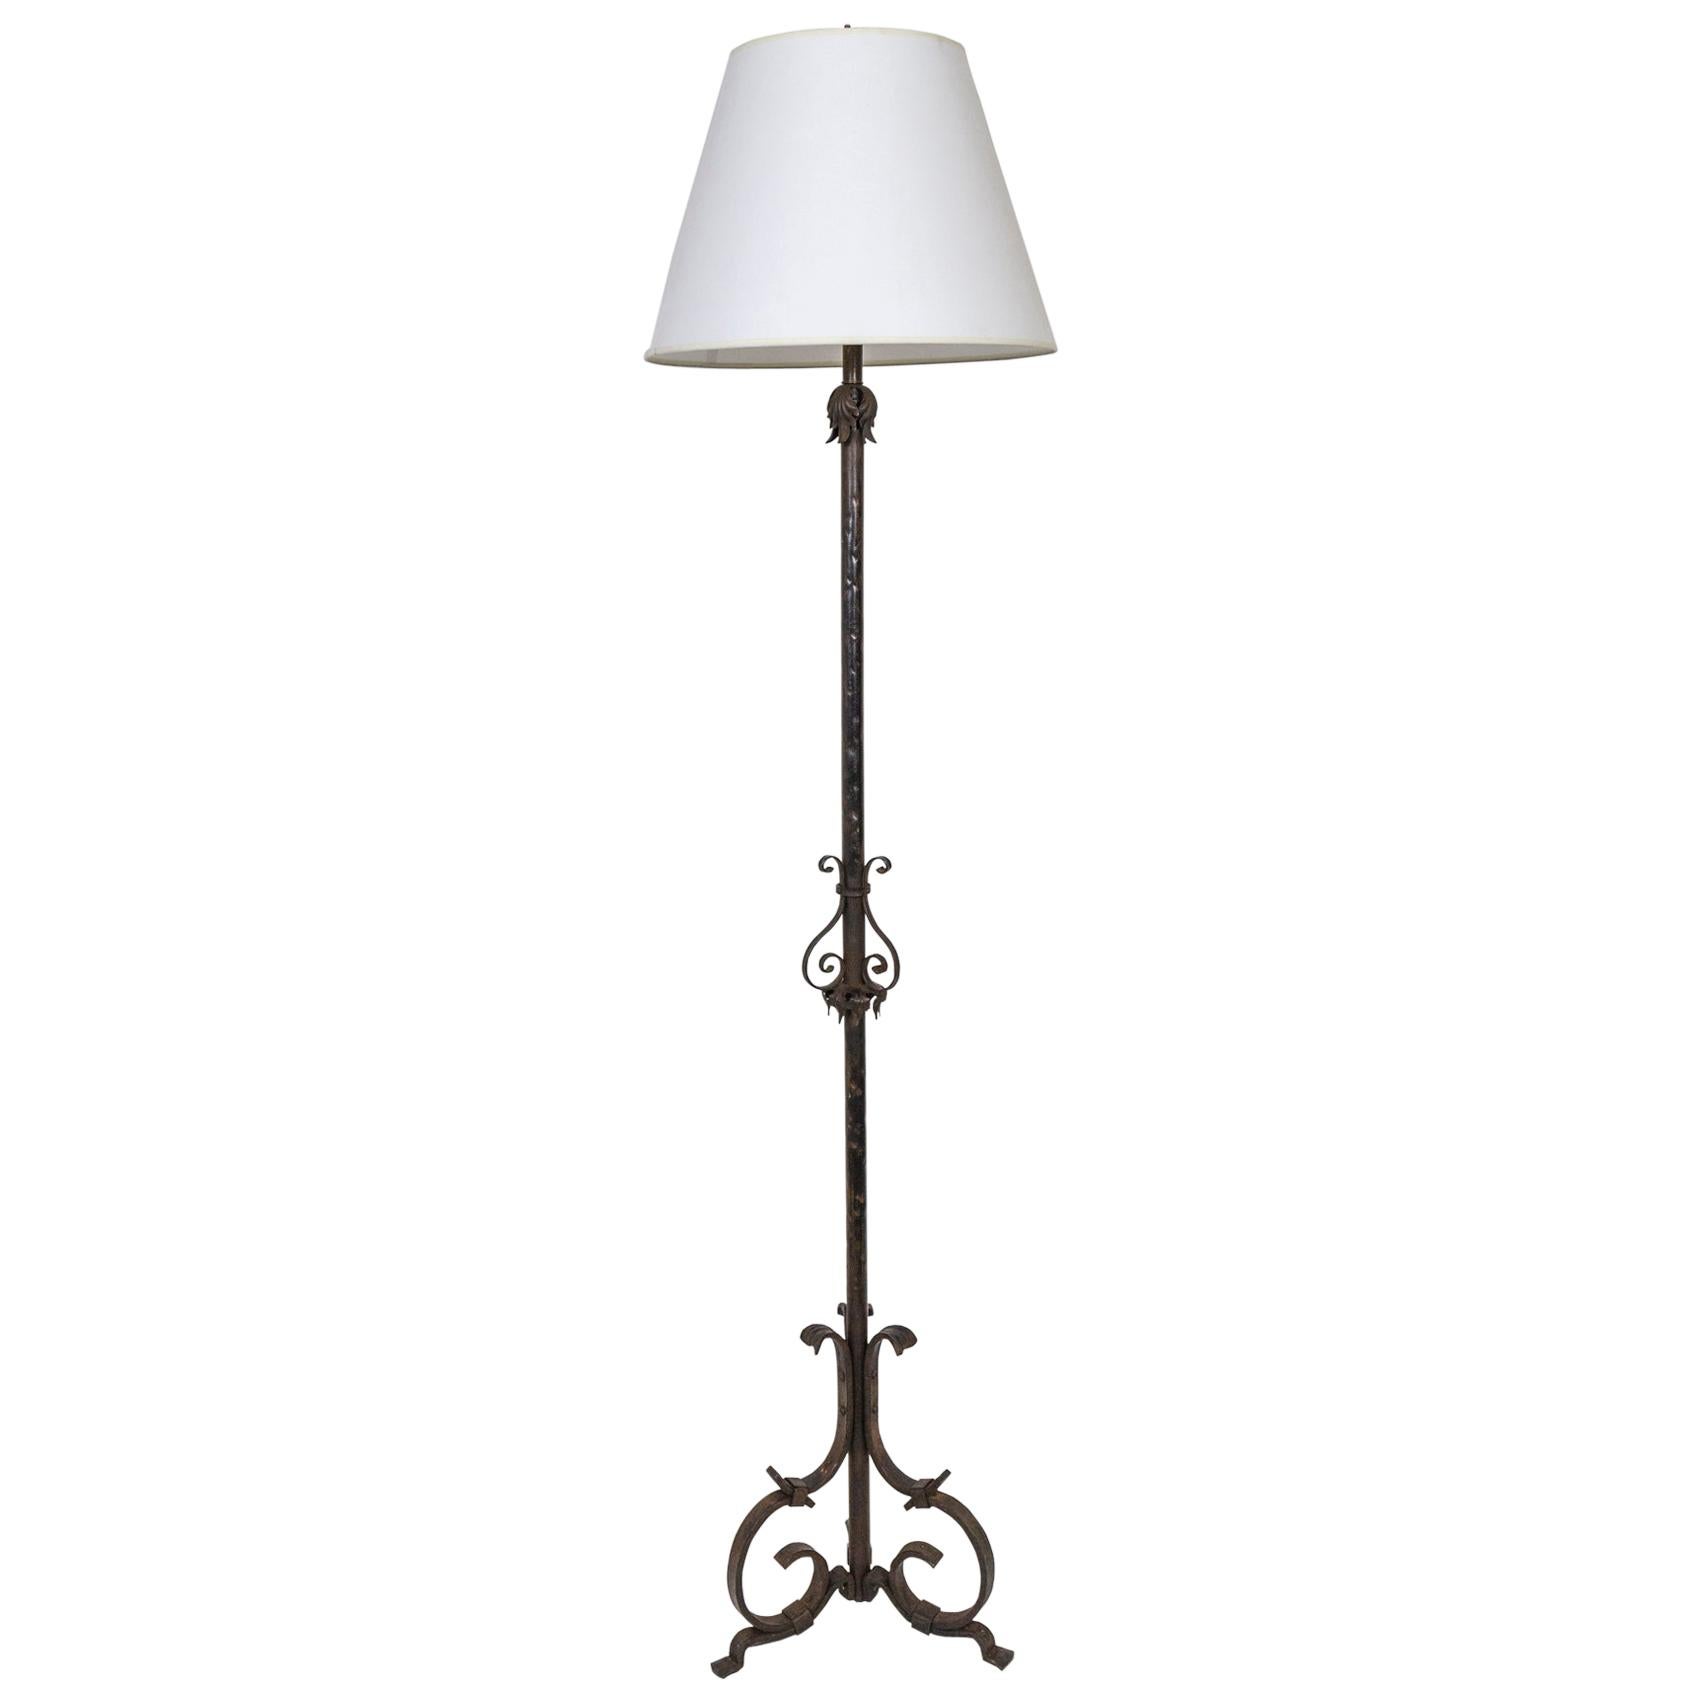 Antique Wrought Iron Scroll Floor Lamp For Sale